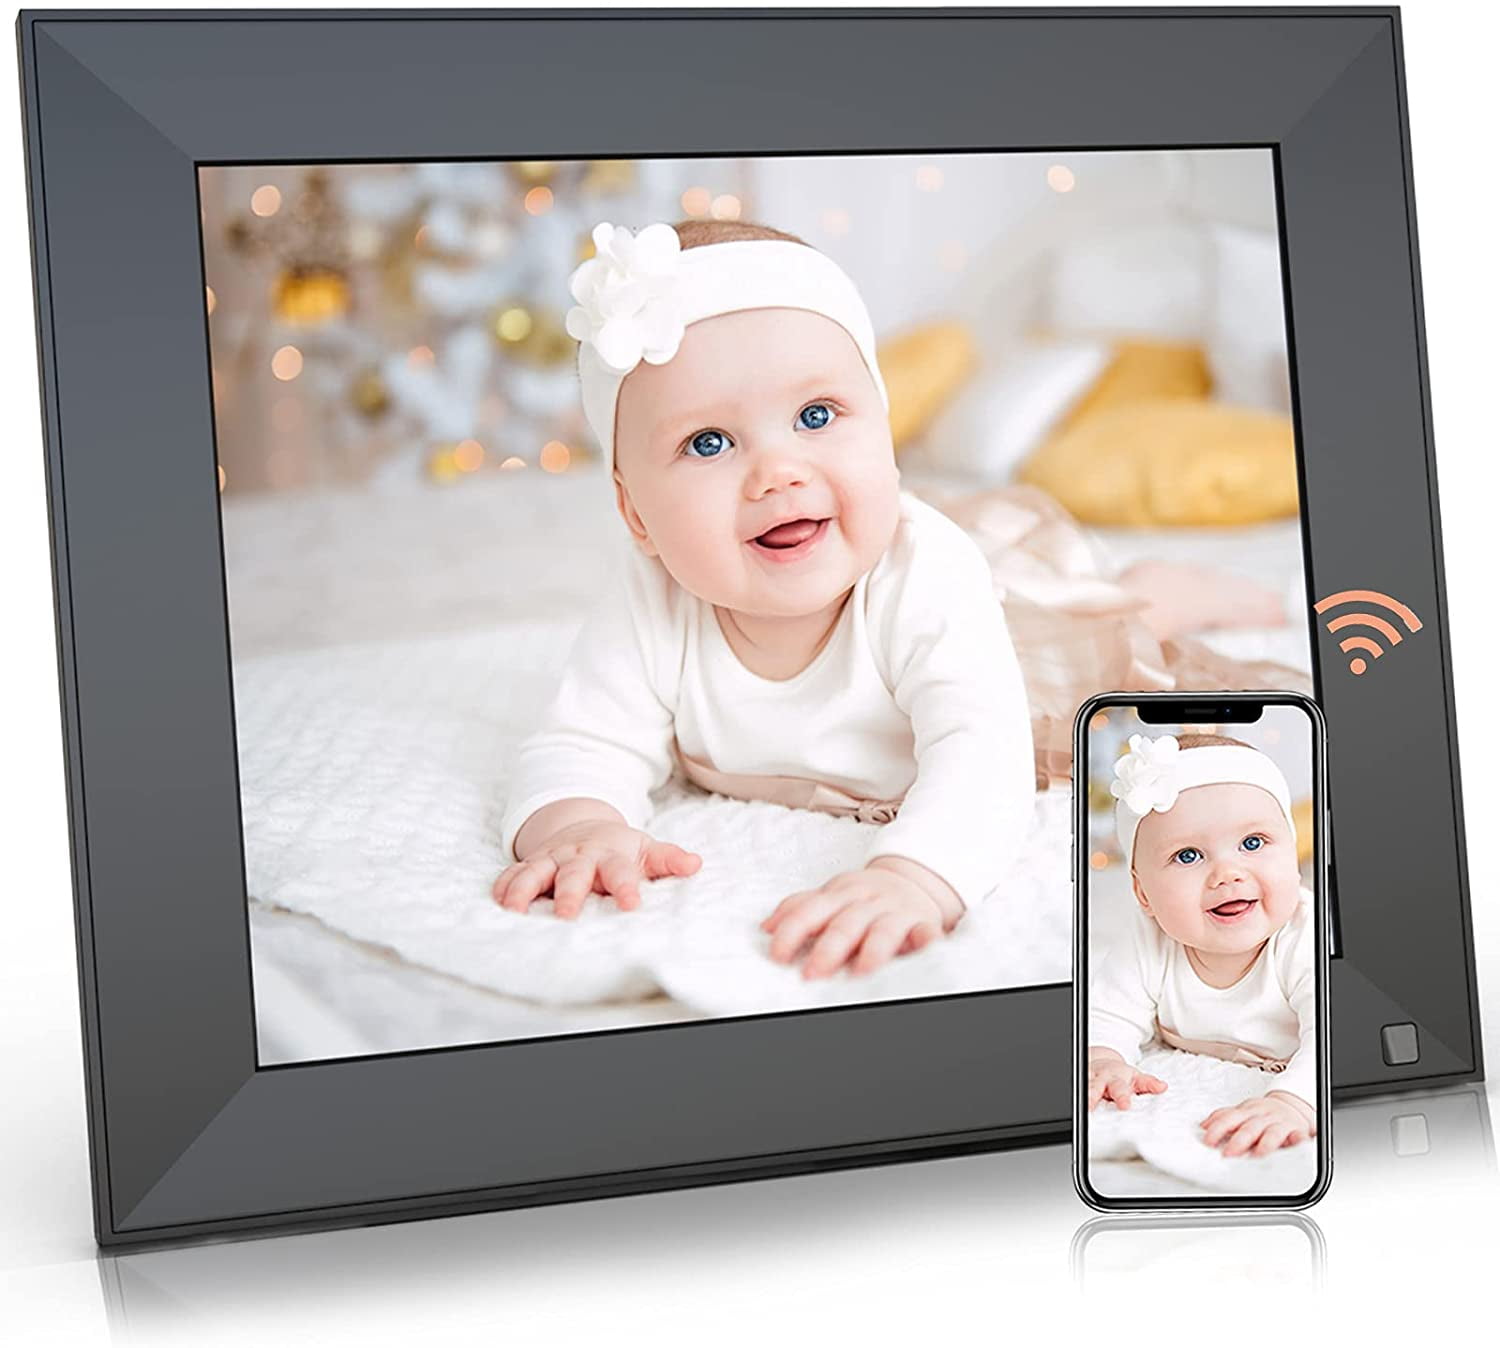 BSIMB 15 inch Large Digital Picture Frame, WiFi Photo Frame Large Screen  with 16GB Storage, Auto-Rotate, Share Photos and Videos via App Email, Gift  for Loved One 